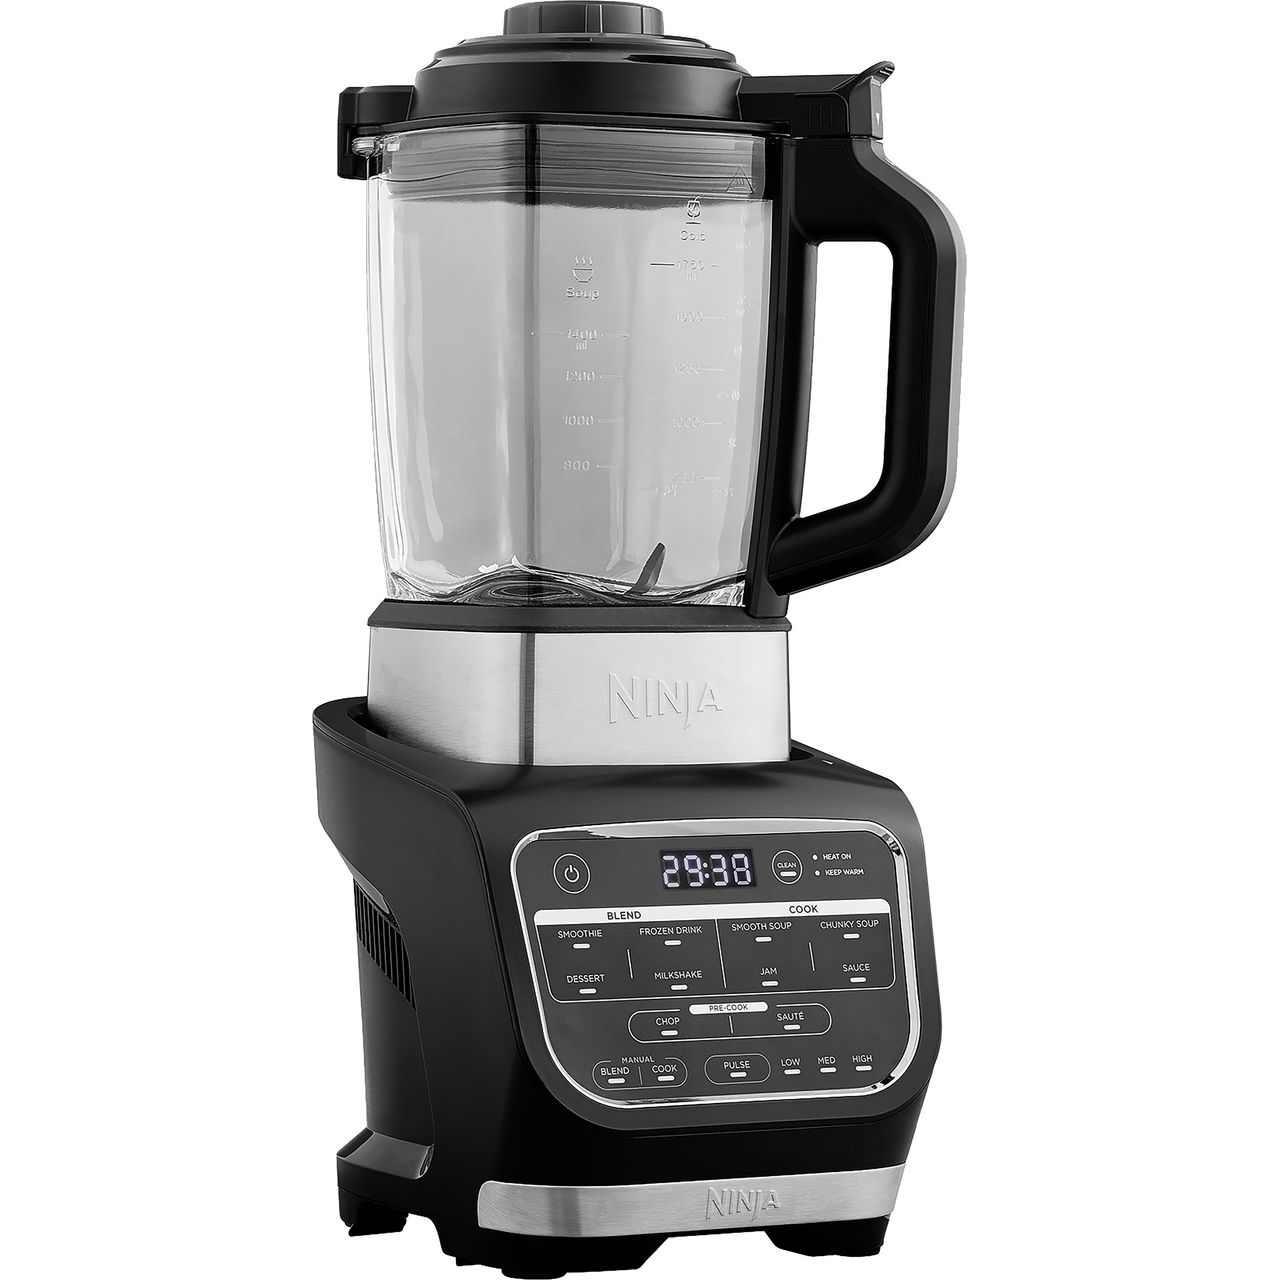 Ninja Soup Maker and Blender HB150UK with 2 Accessories Review